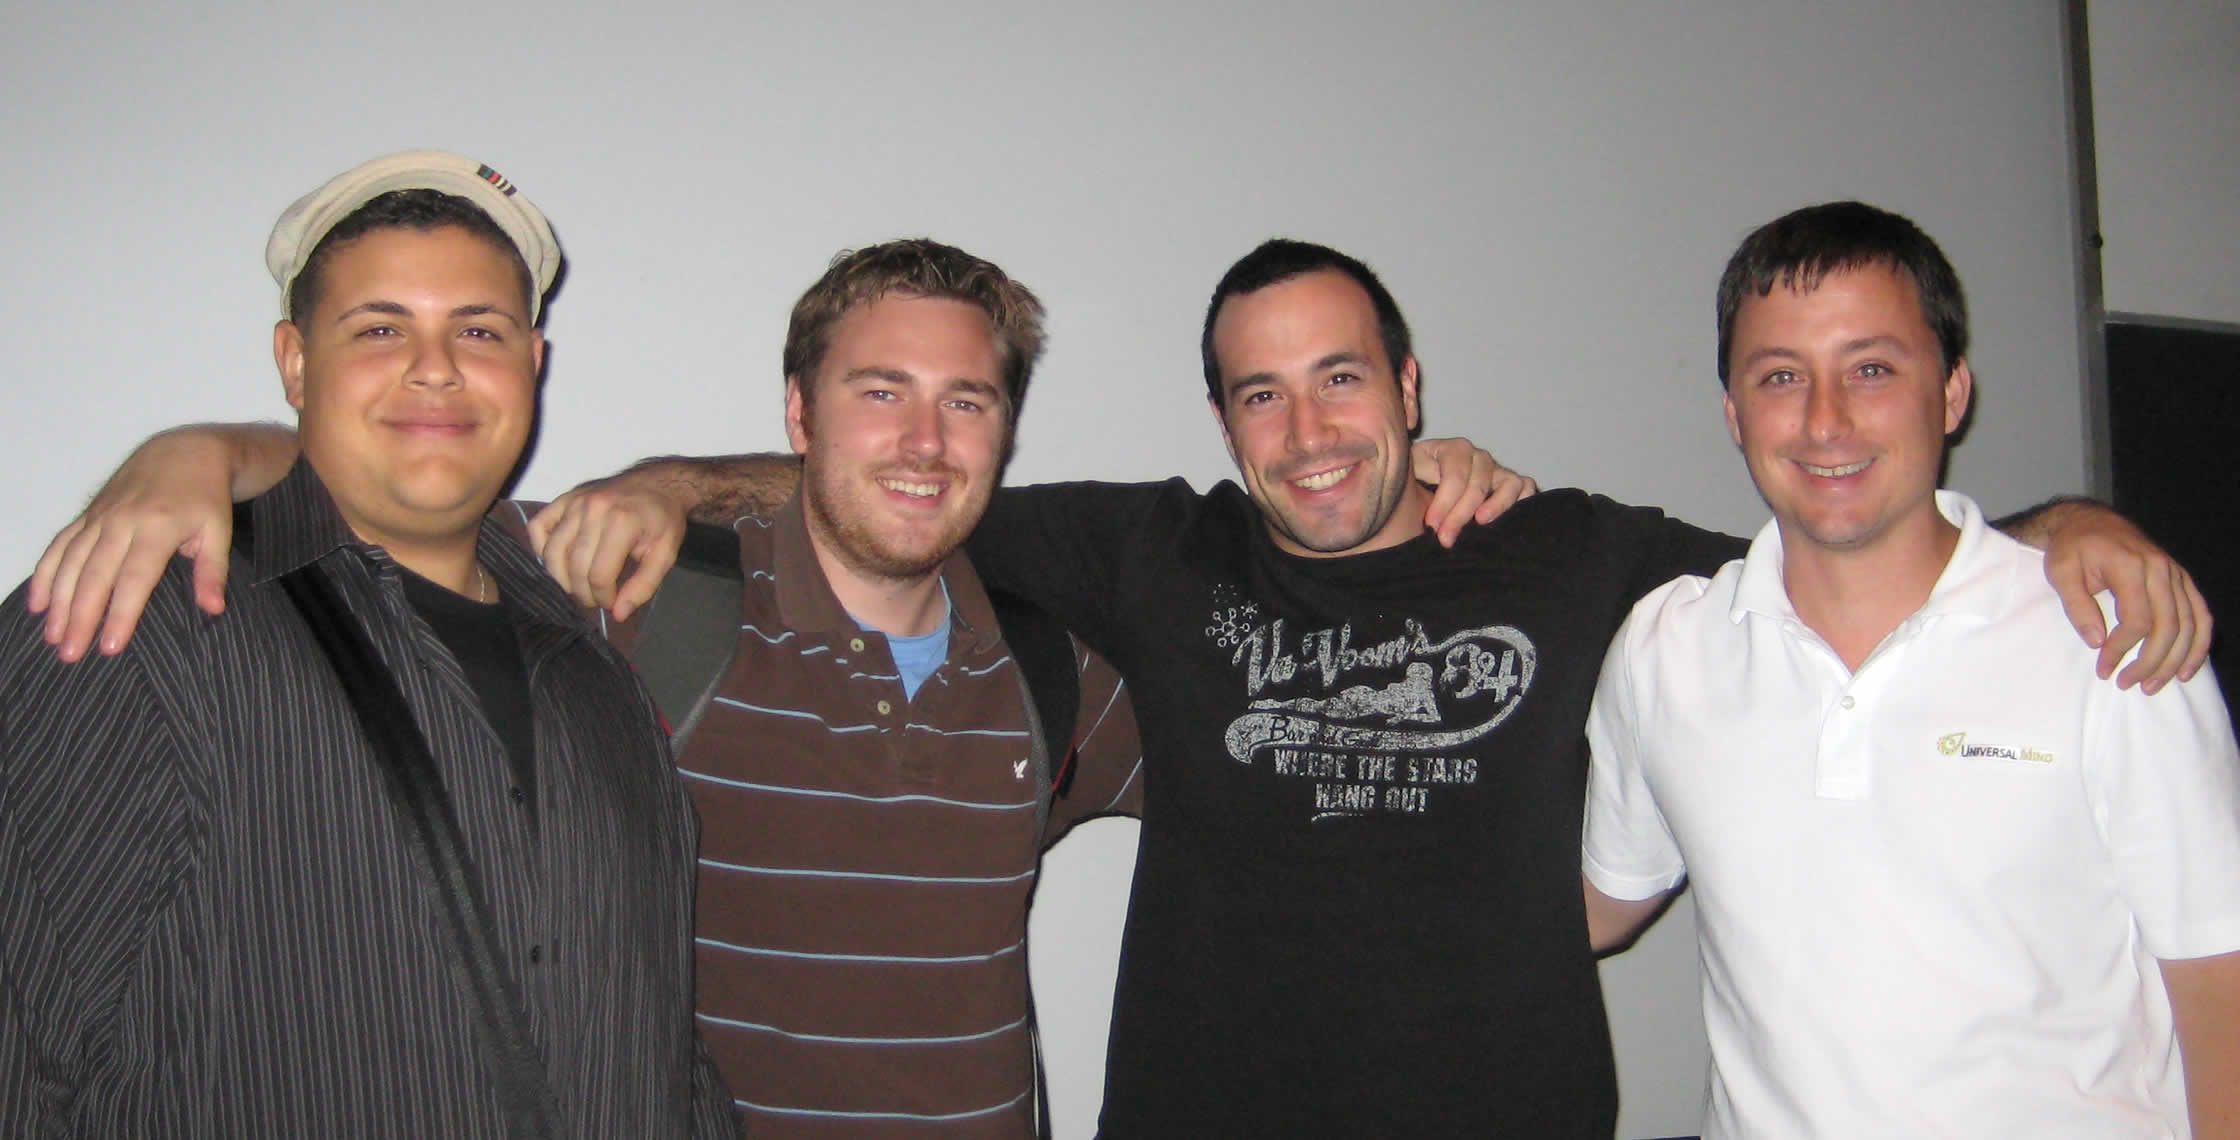 Ben Nadel at the New York ColdFusion User Group (Jul. 2008) with: Clark Valberg and Simon Free and Dan Wilson